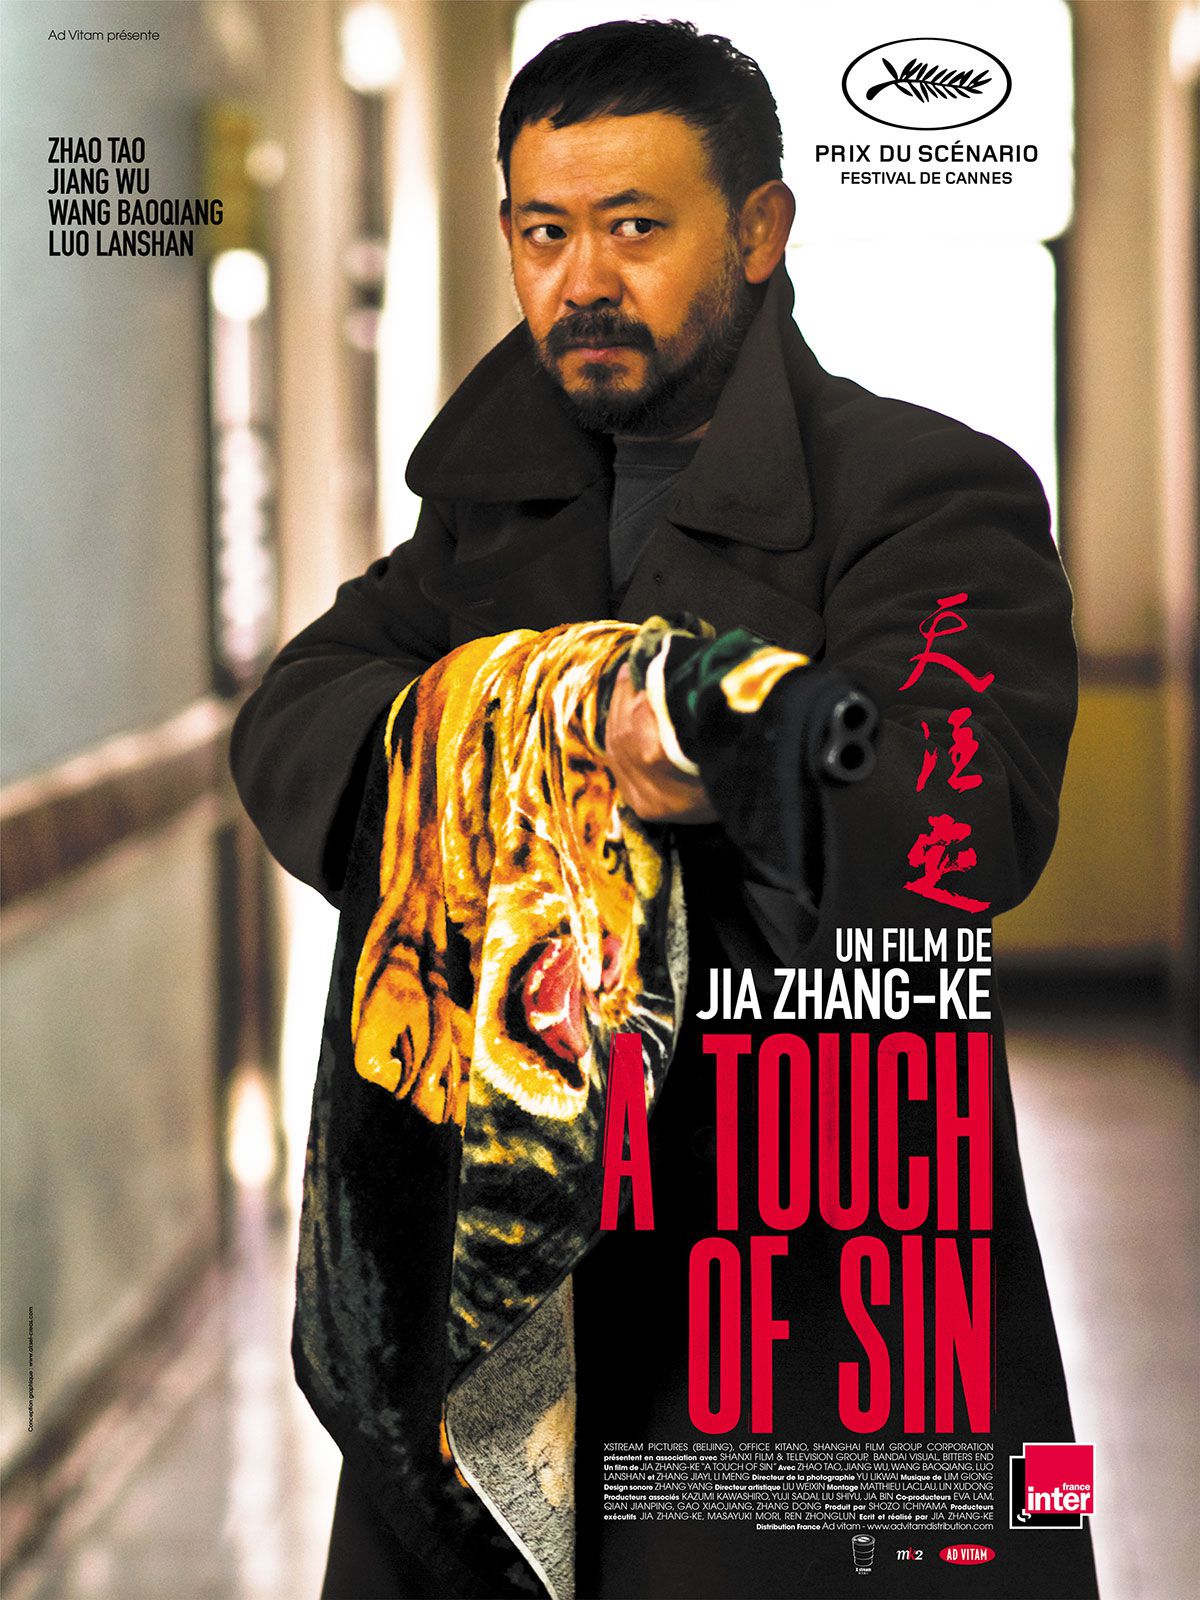 A Touch of Sin - Film (2013) streaming VF gratuit complet